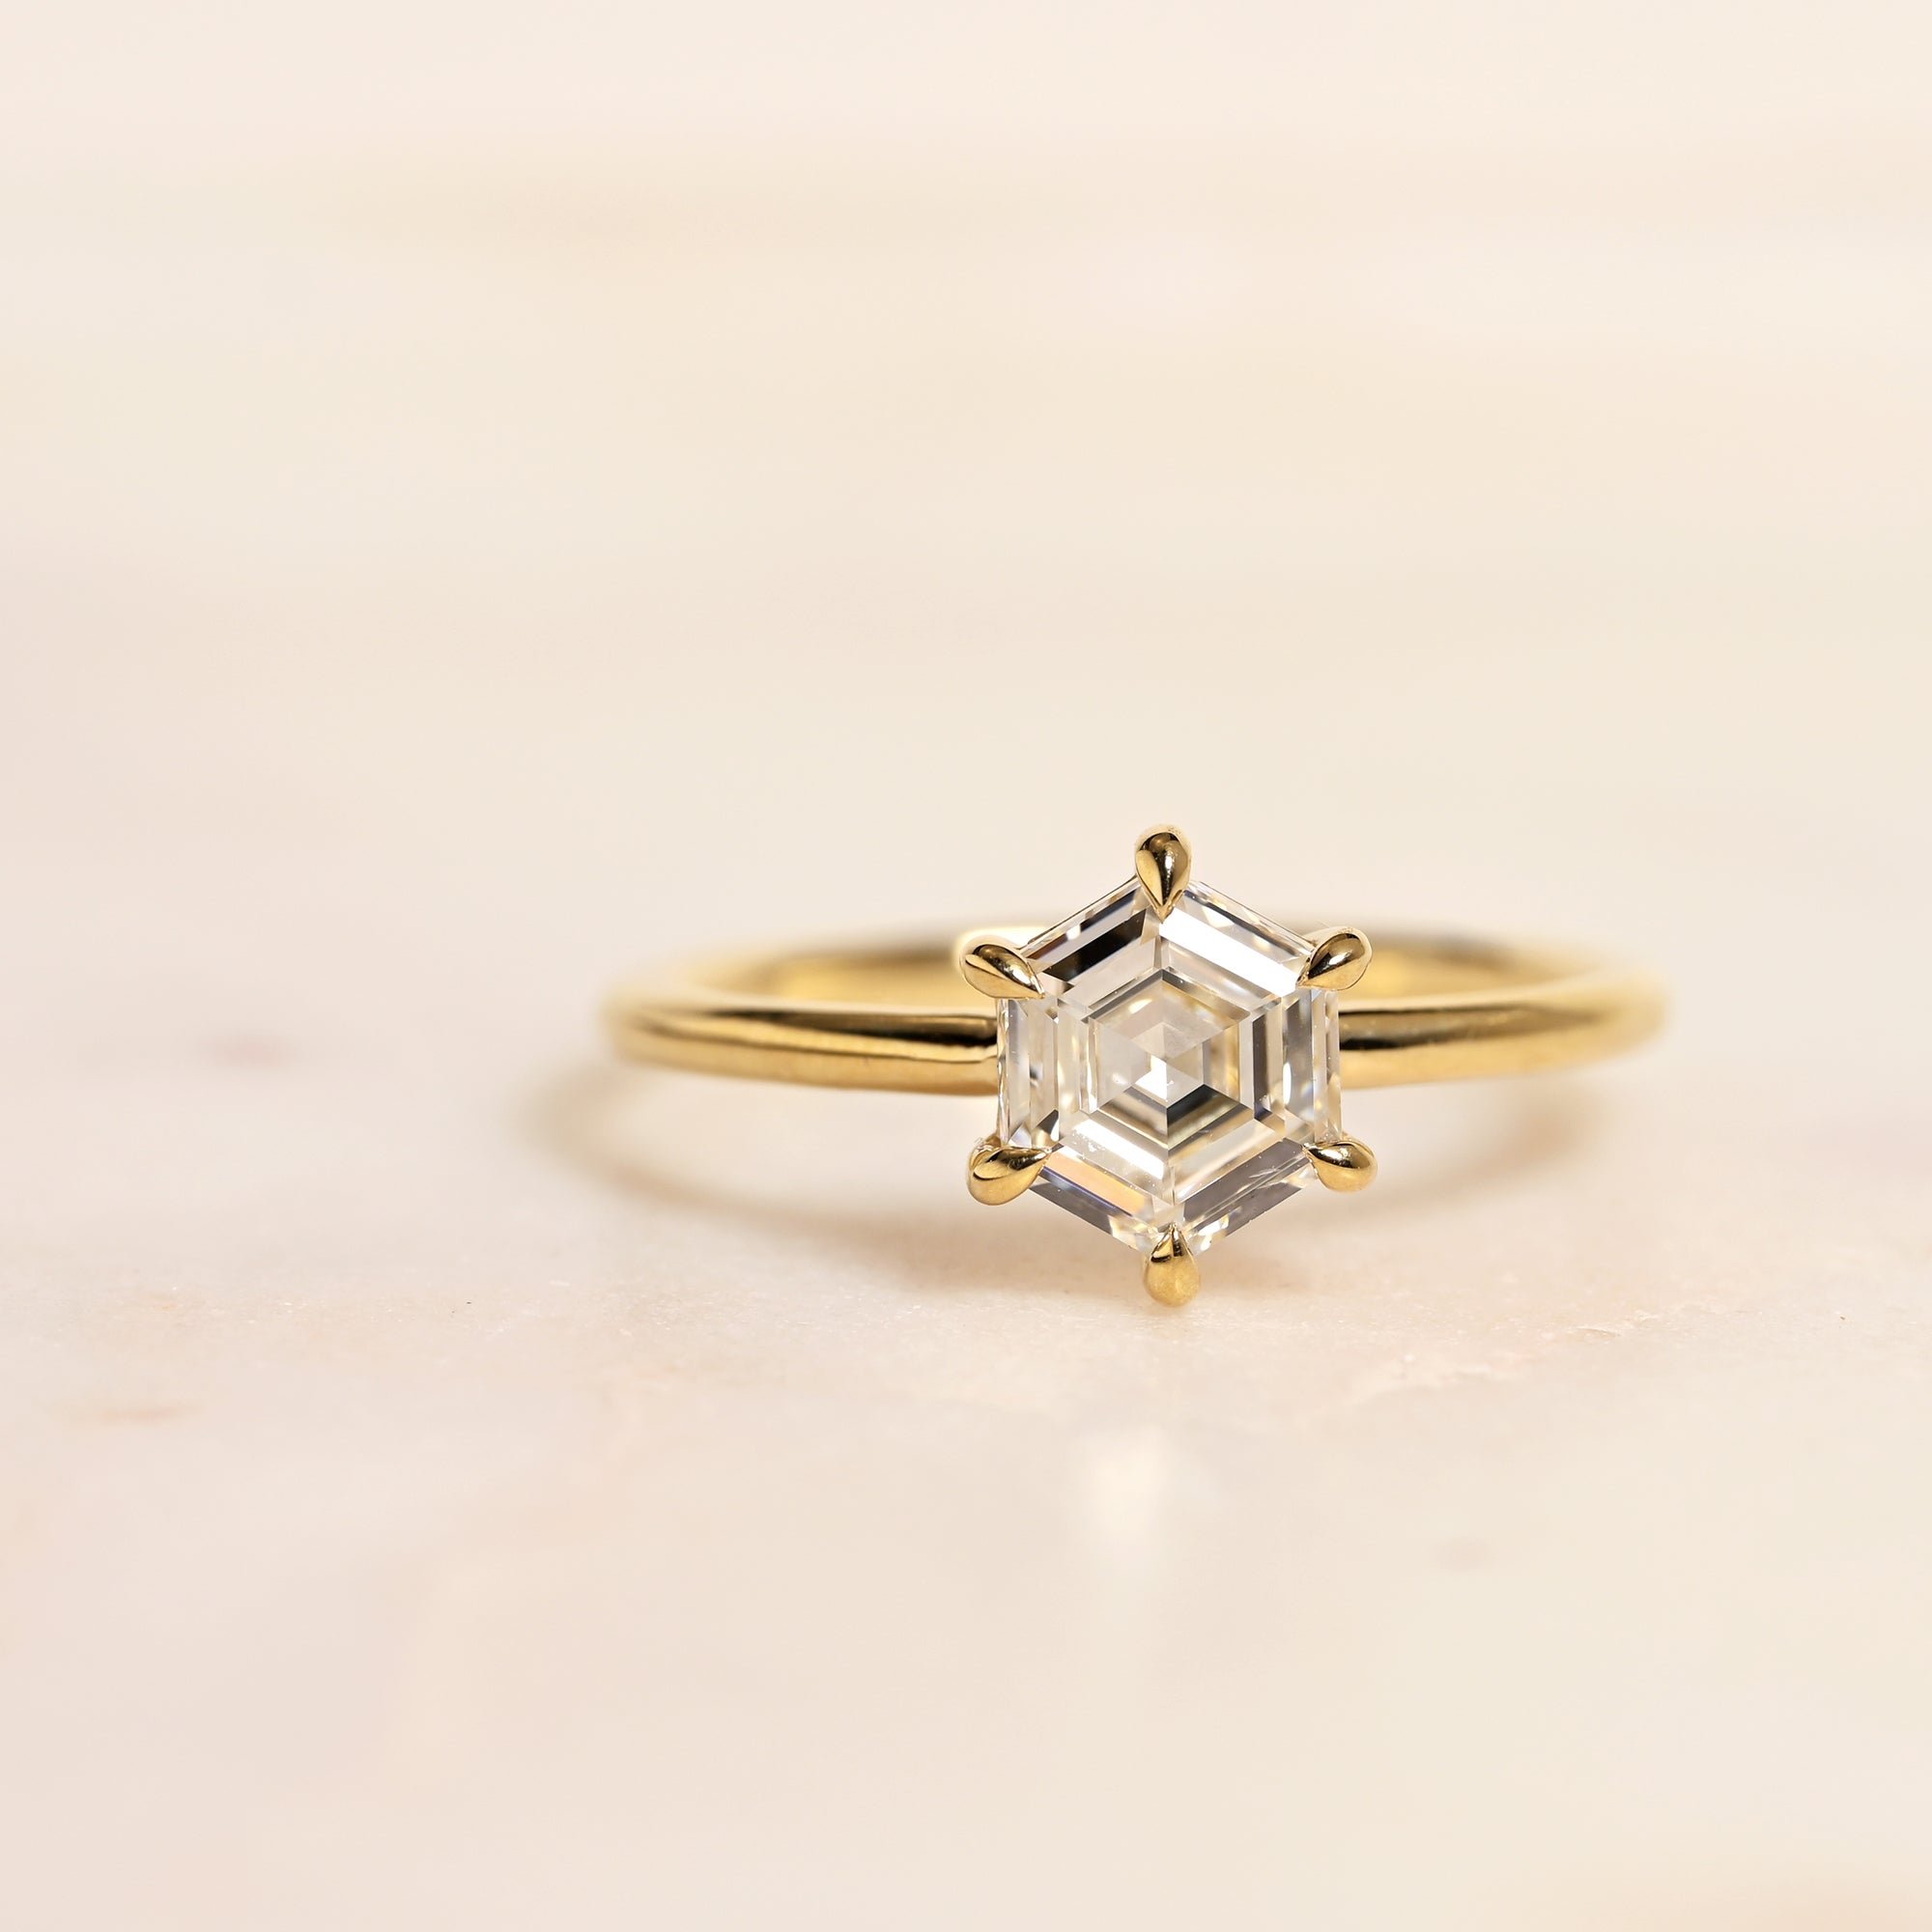 Modern natural hexagon colorless diamond in 14k yellow gold solitaire setting with six prong